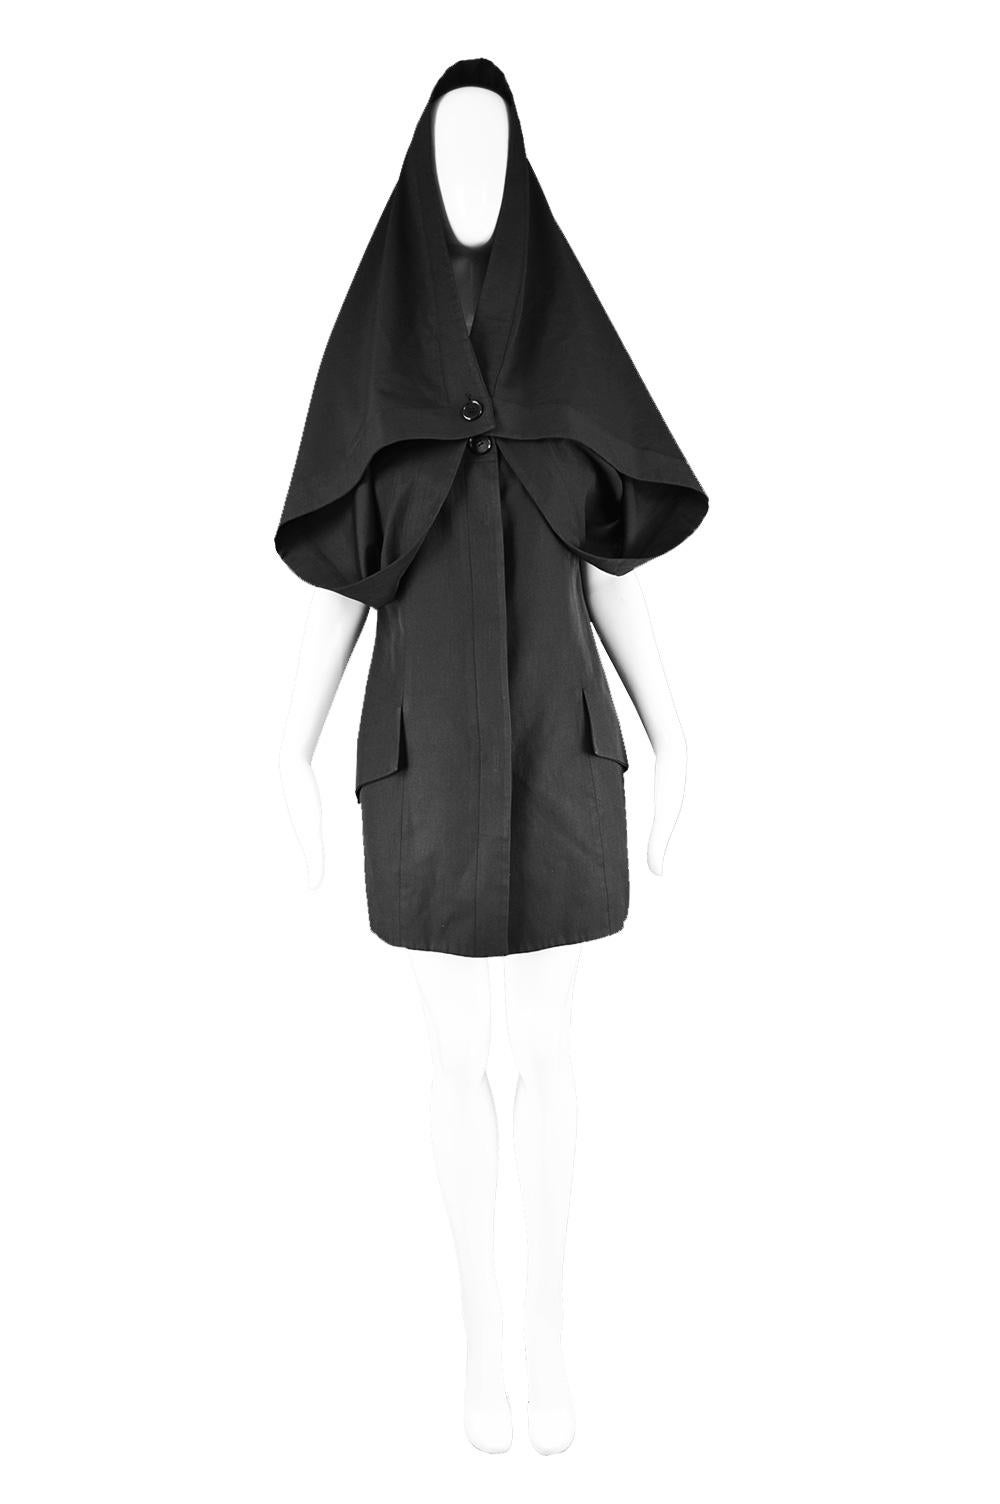 Early John Galliano Black Avant Garde Cape Dress Made in Britain, 1980s

Size: Marked UK 12 which is roughly a US 8/ EU 40. Please check measurements.
Bust - 38” / 96cm (meant to have a loose fit)
Waist - 34” / 86cm
Hips - 40” / 101cm
Length